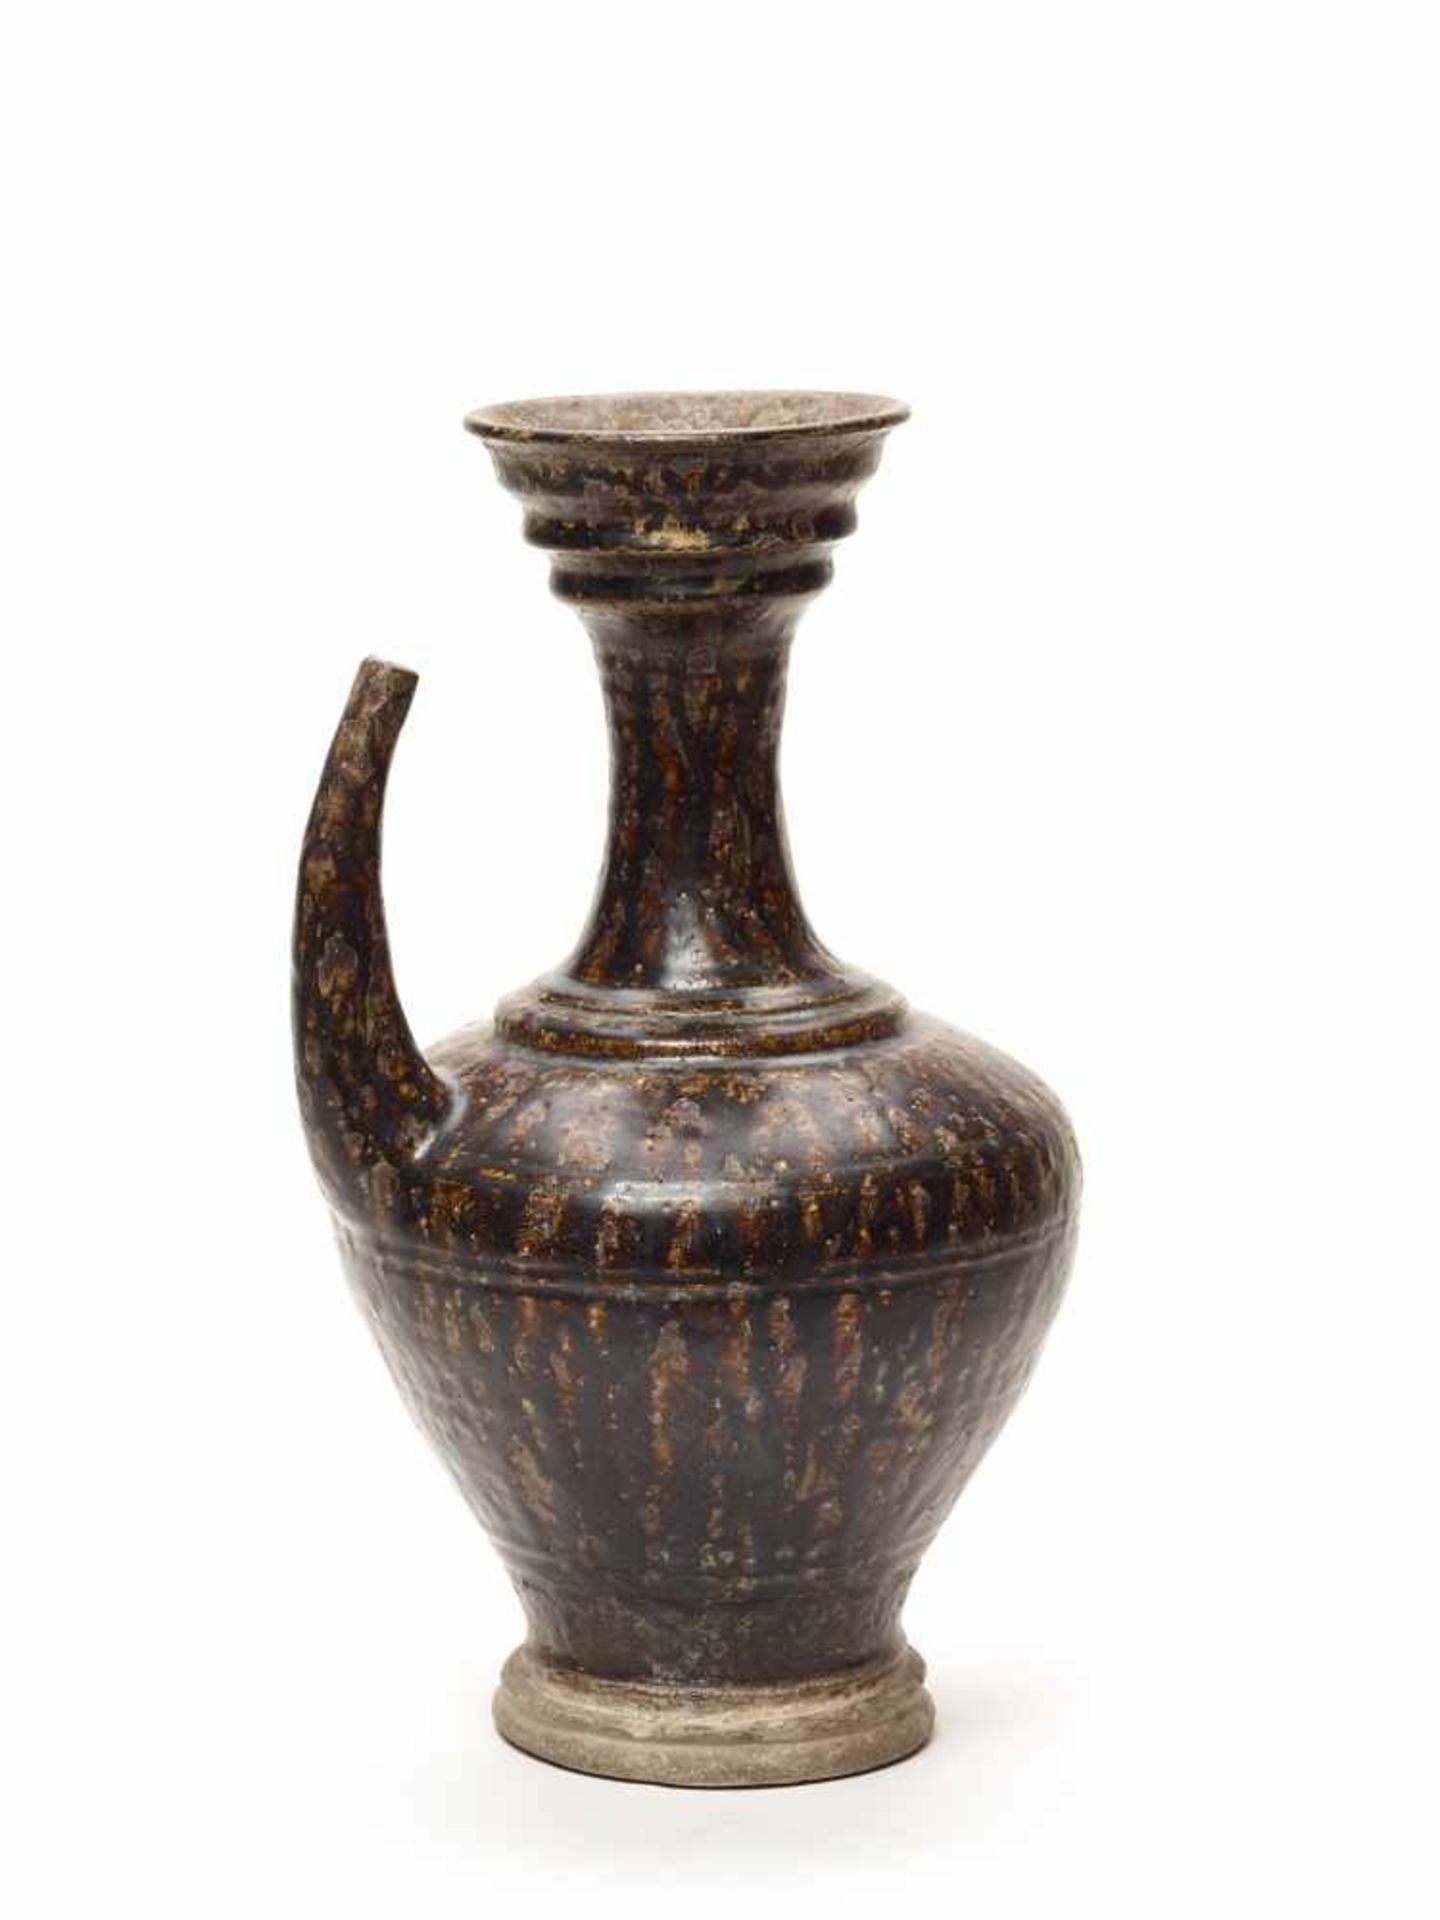 LARGE ANGKOR PERIOD KHMER CERAMIC OIL VESSEL – 11th/12th CENTURYLow-fired stoneware, covered with